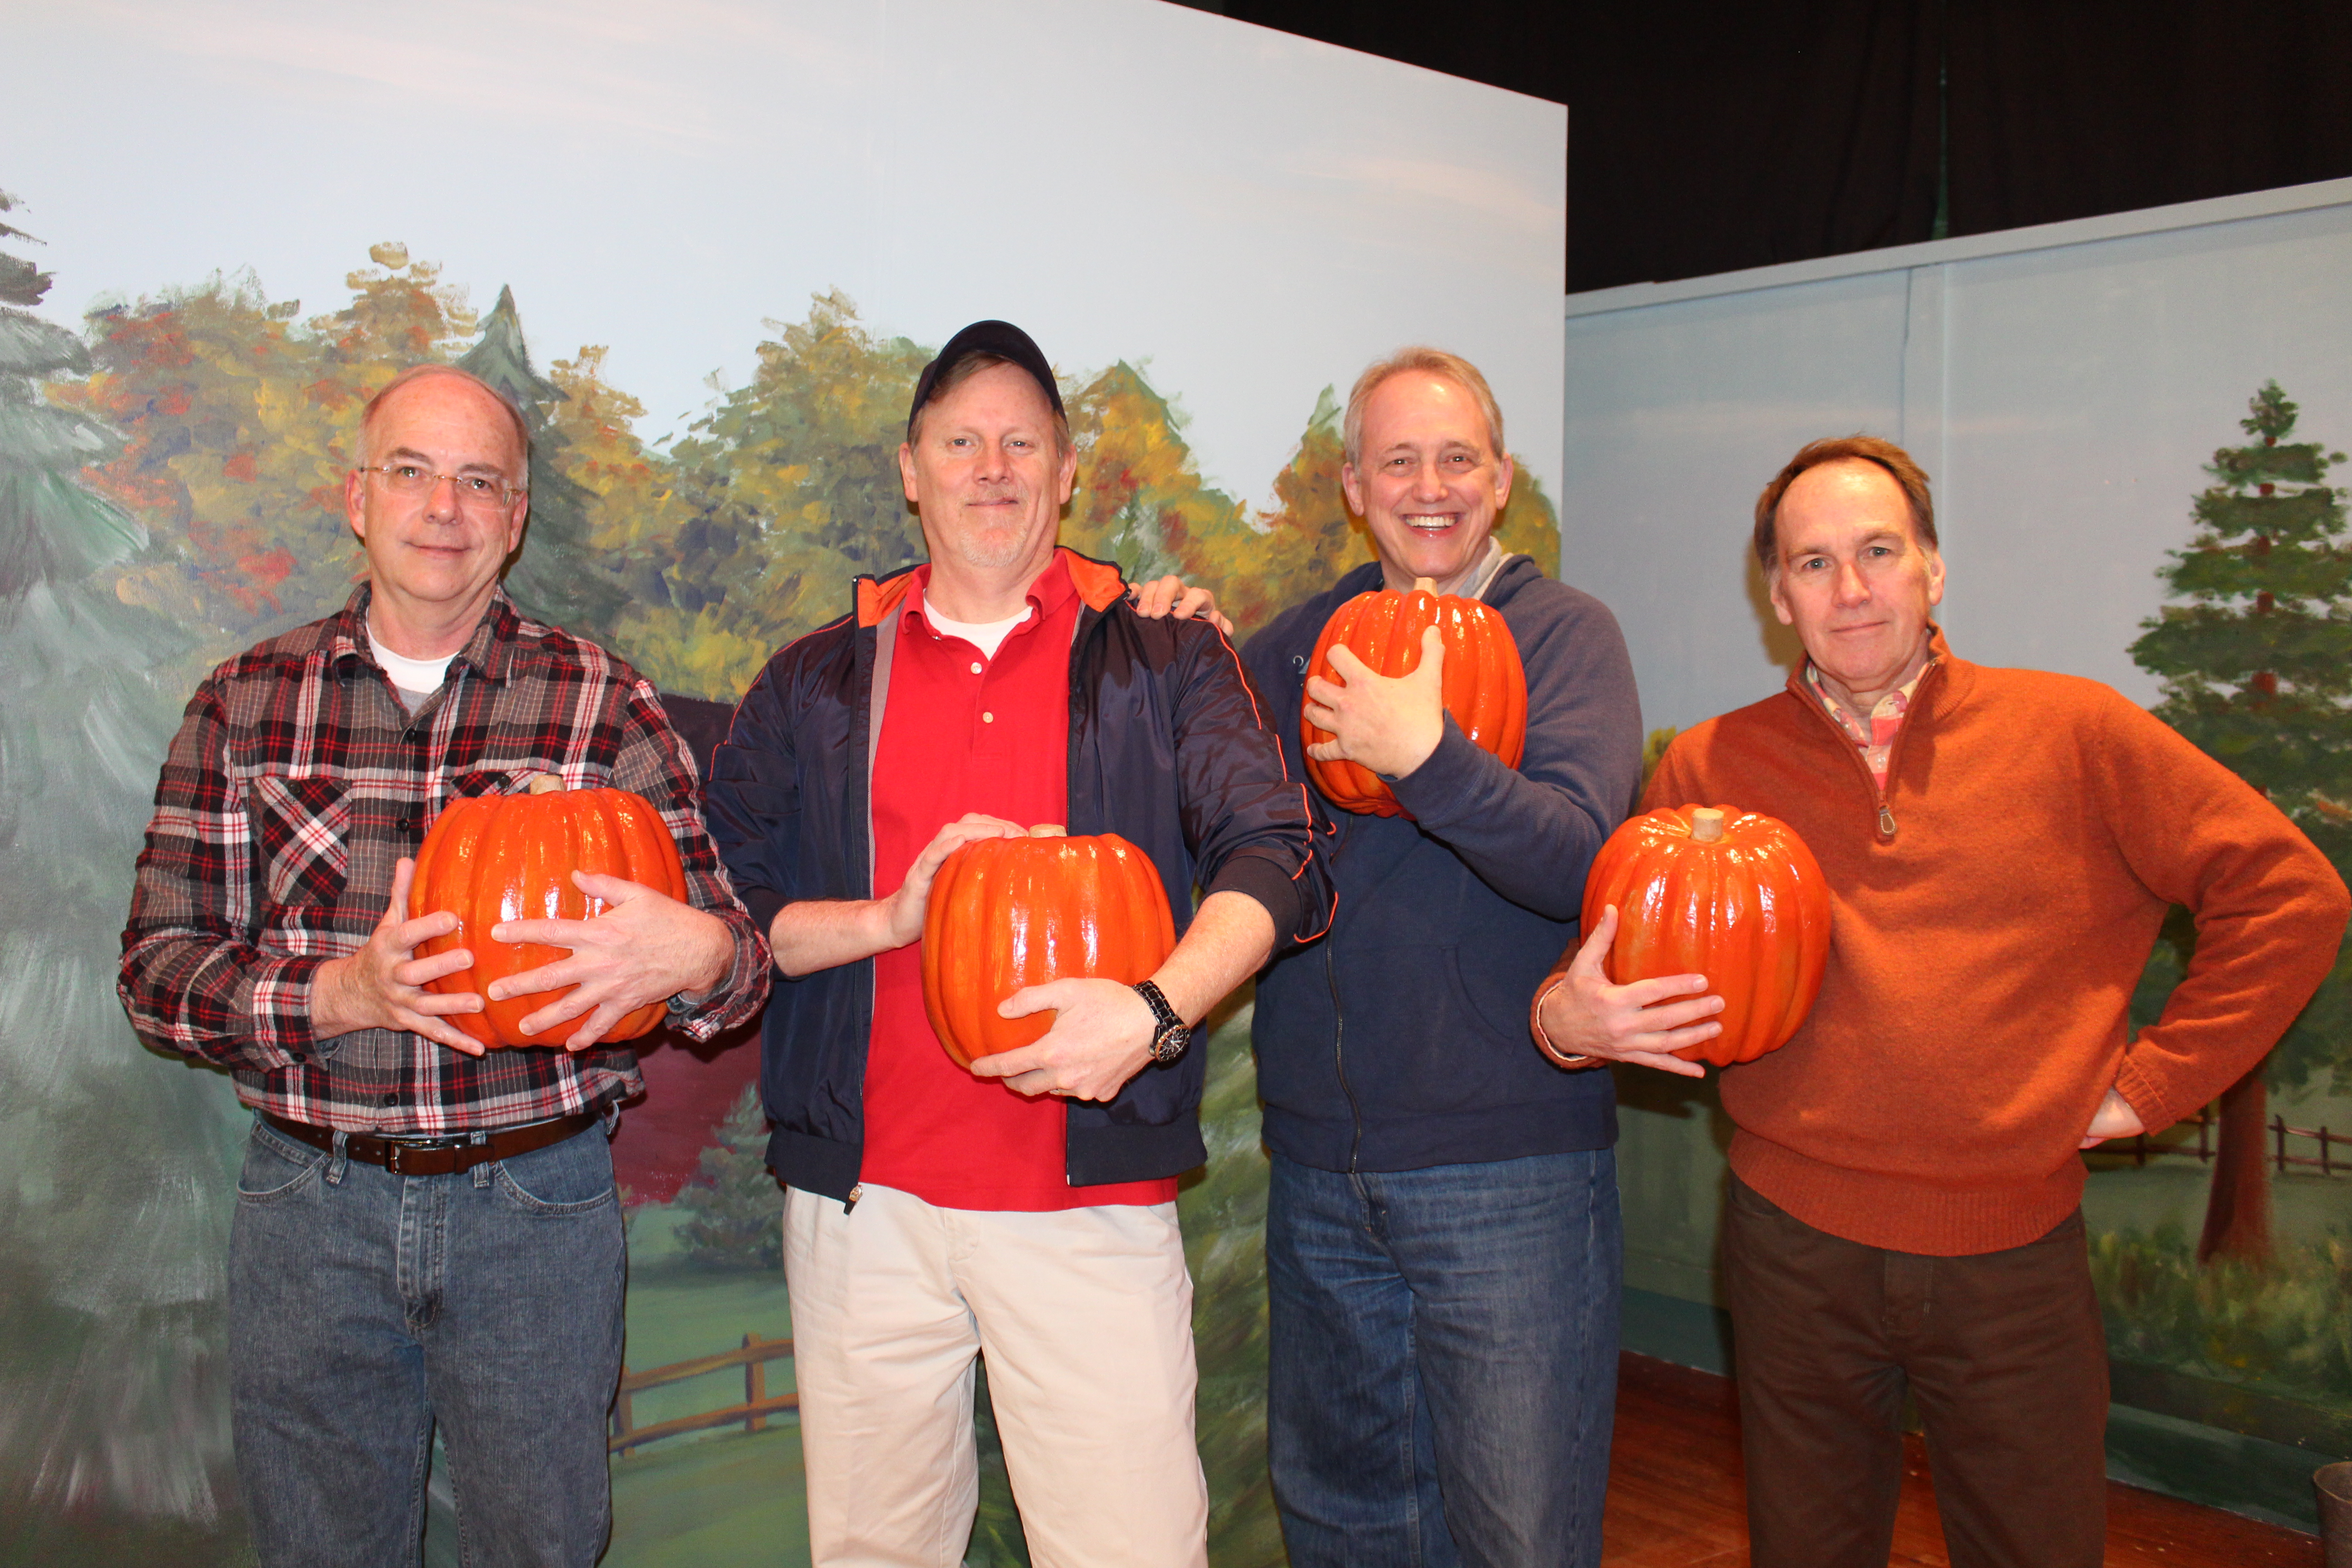 The men of Harmony prepare for the annual pumpkin toss. From left to right: James Hayes, Dave Surina, Will Carlson and Jeff Maess. (Submitted photo)